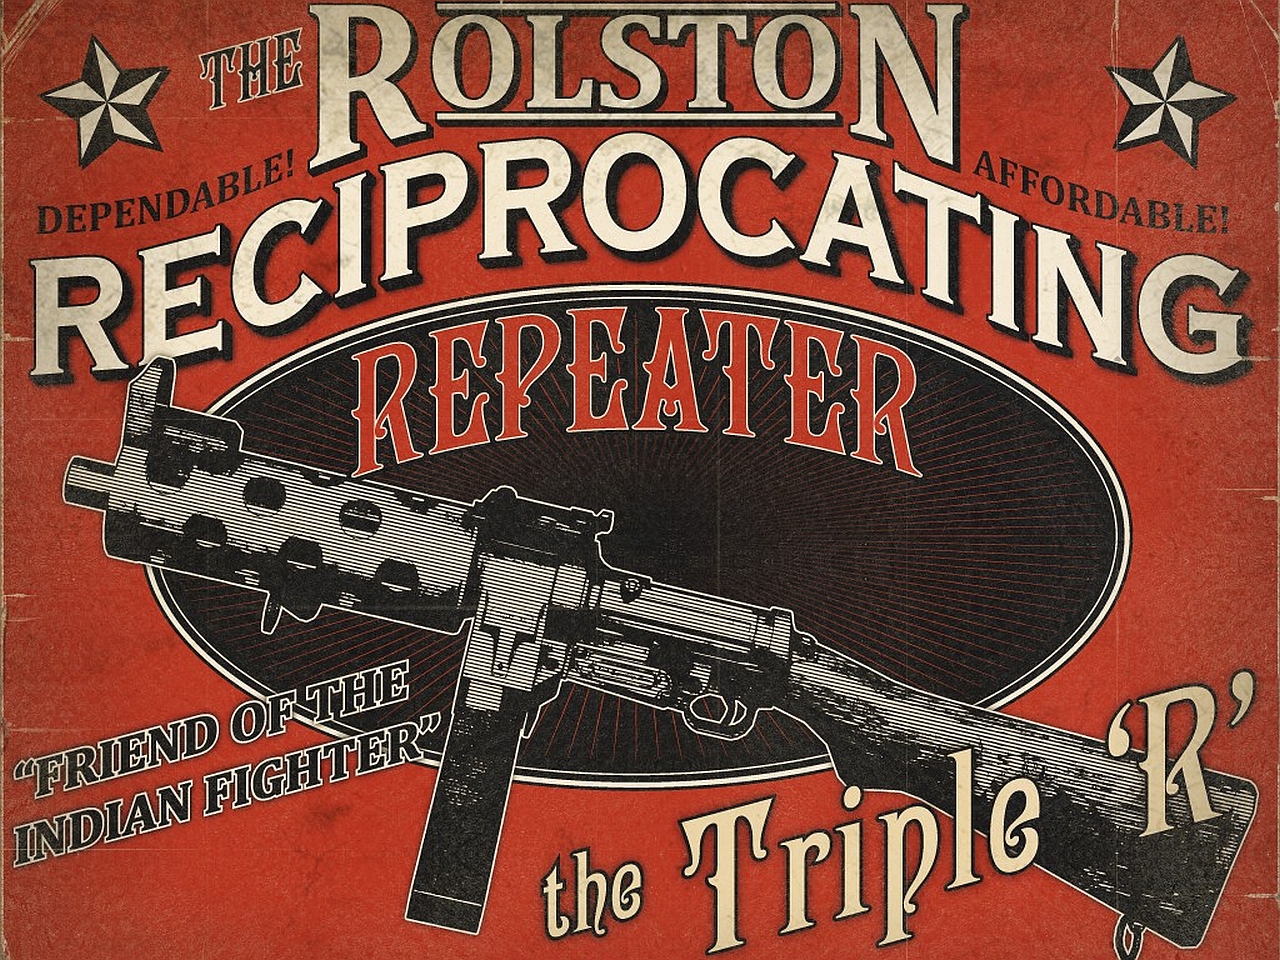 rolston repeater rifle Picture